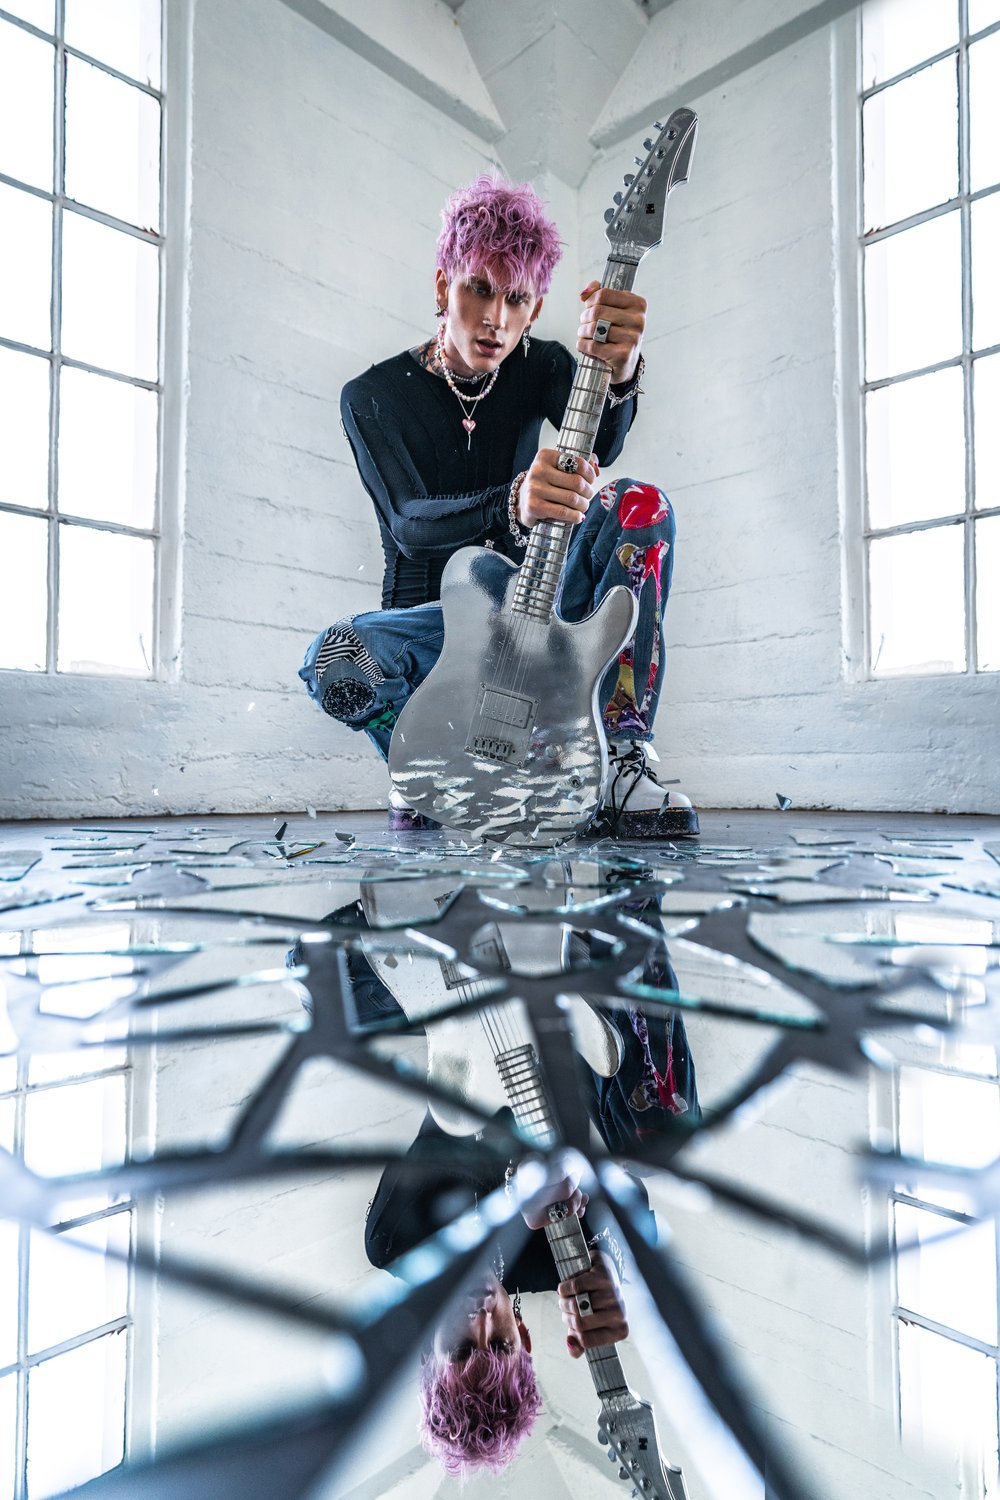 Machine Gun Kelly “Mainstream Sellout” Review: Hit or Miss?